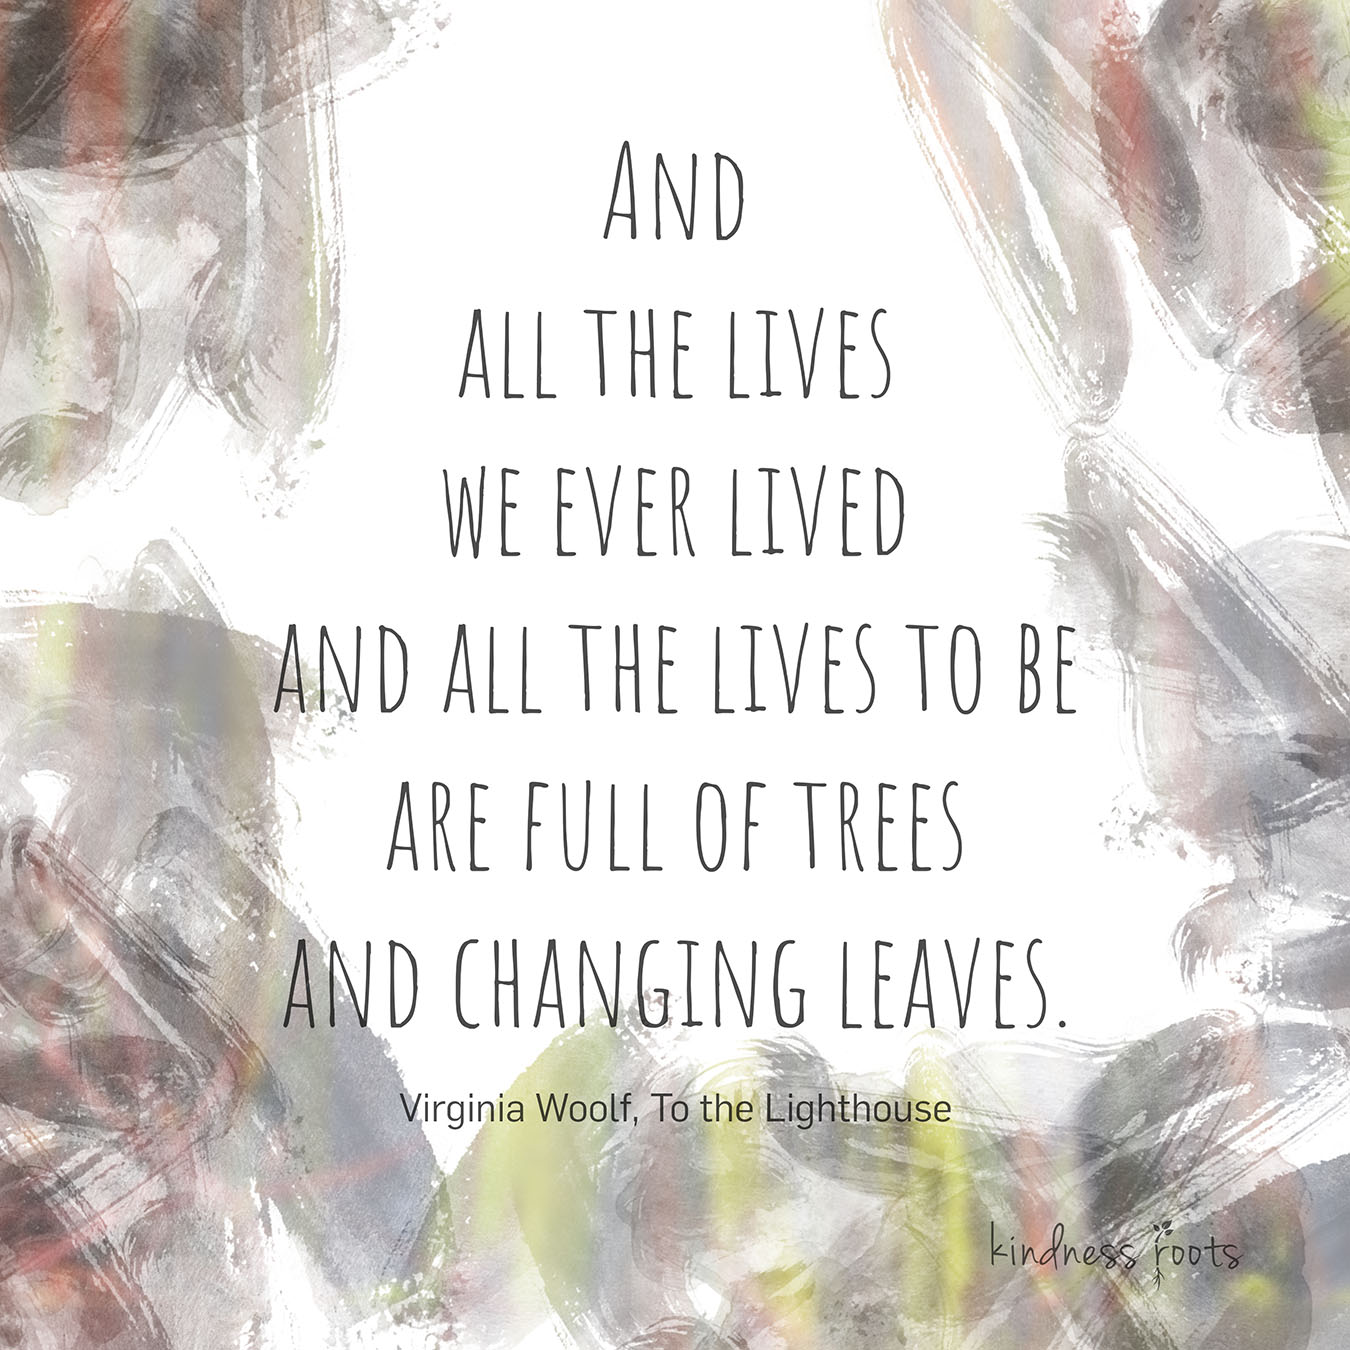 Virginia Wolf quote about our lives and trees.